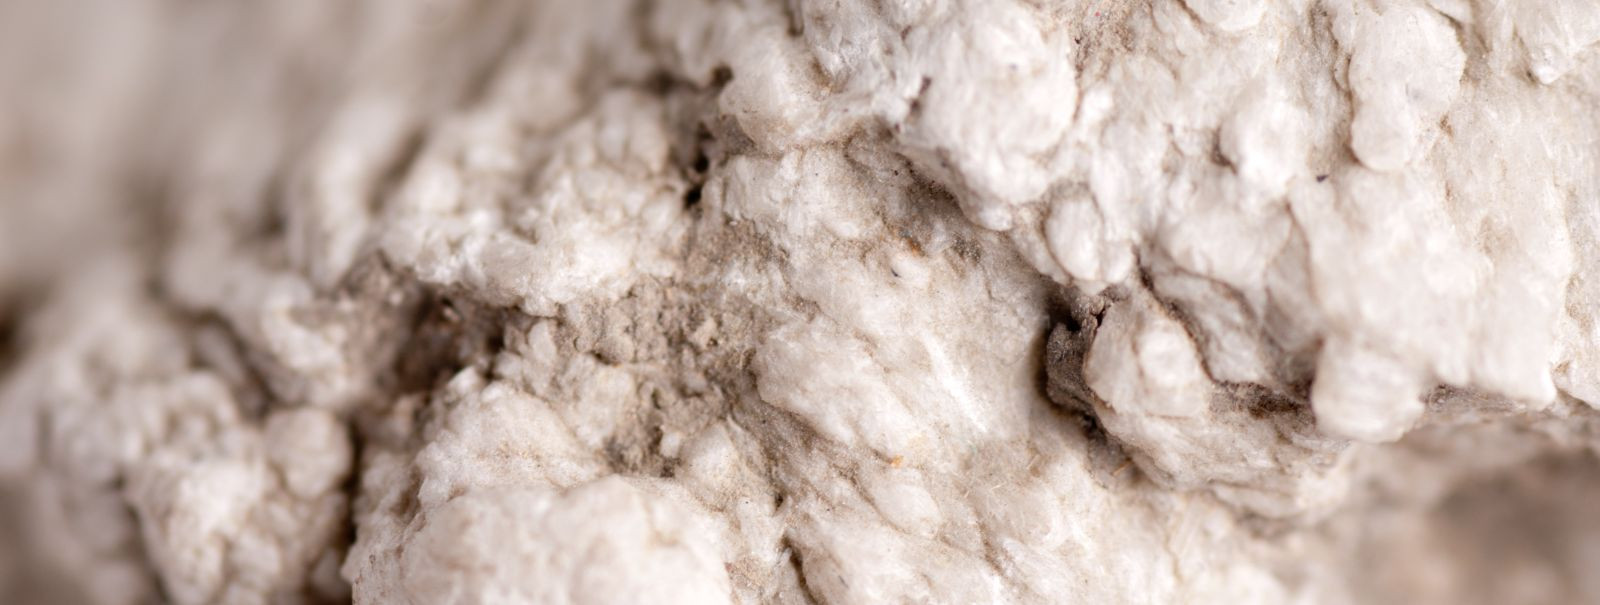 When it comes to insulating your home or building, the material you choose is crucial for ensuring comfort, energy efficiency, and safety. Bulk wool, a natural 